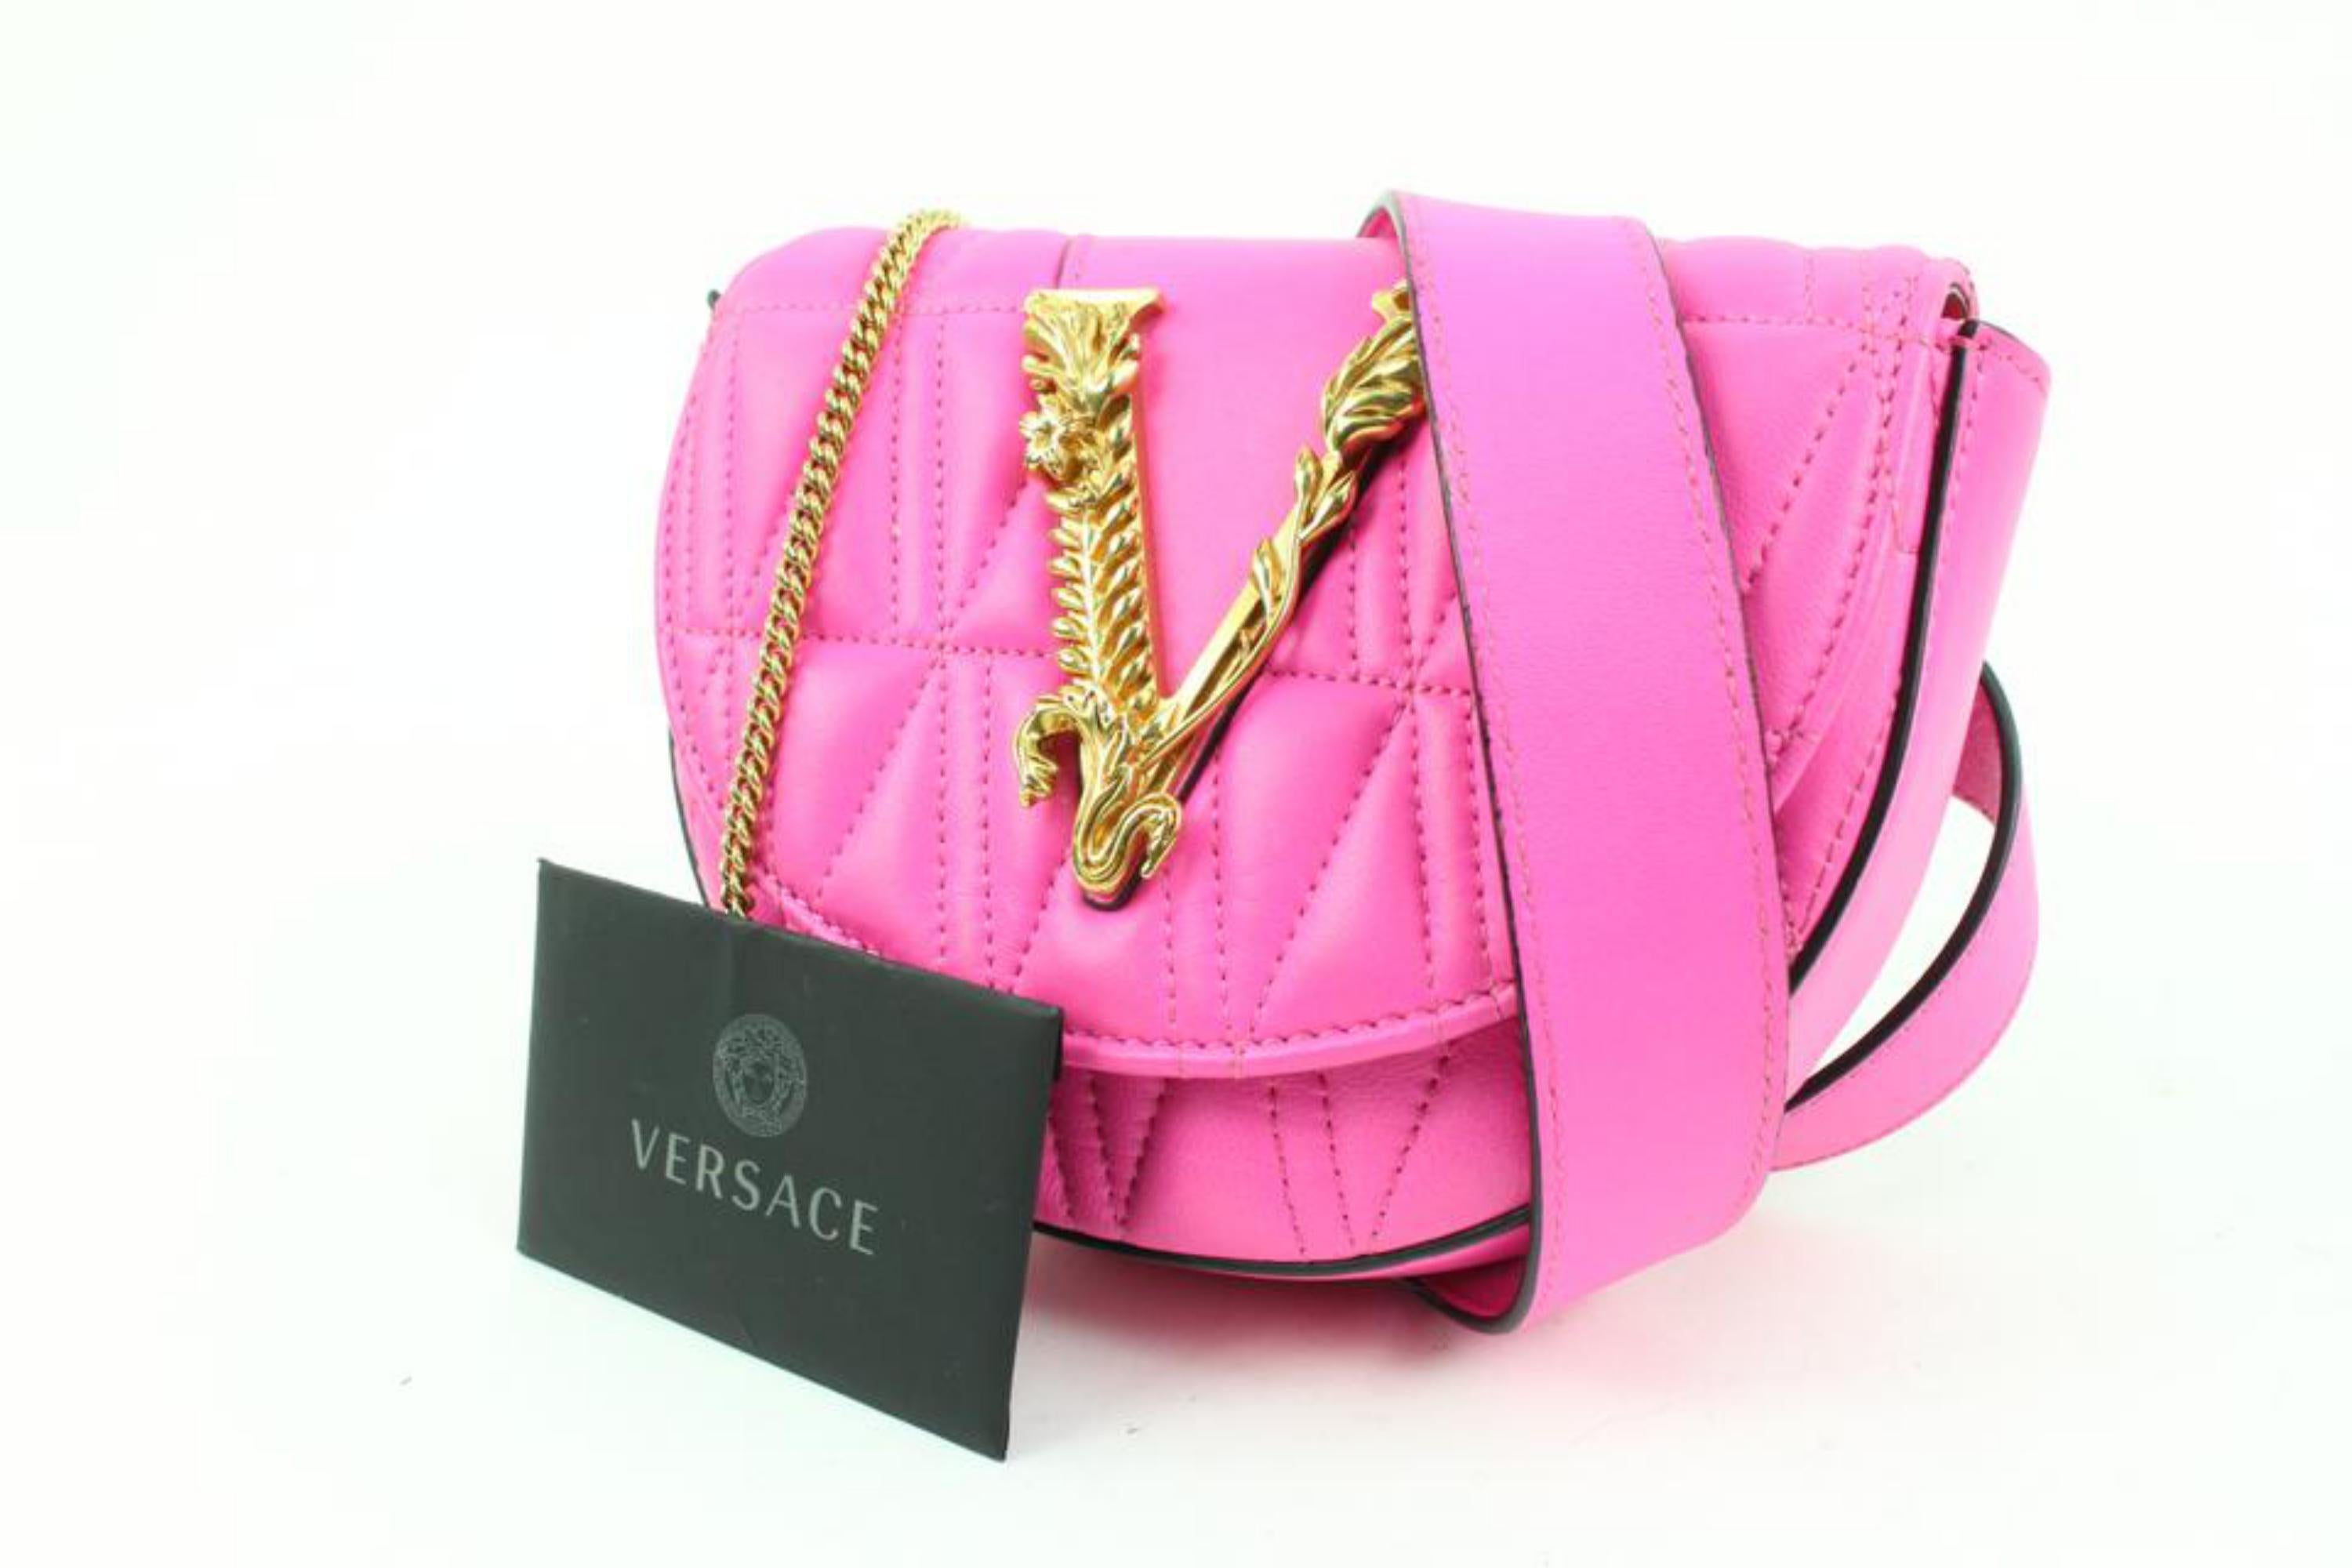 Versace Pink Quilted Leather Fuchsia Virtus Belt Bag s214ve71 6